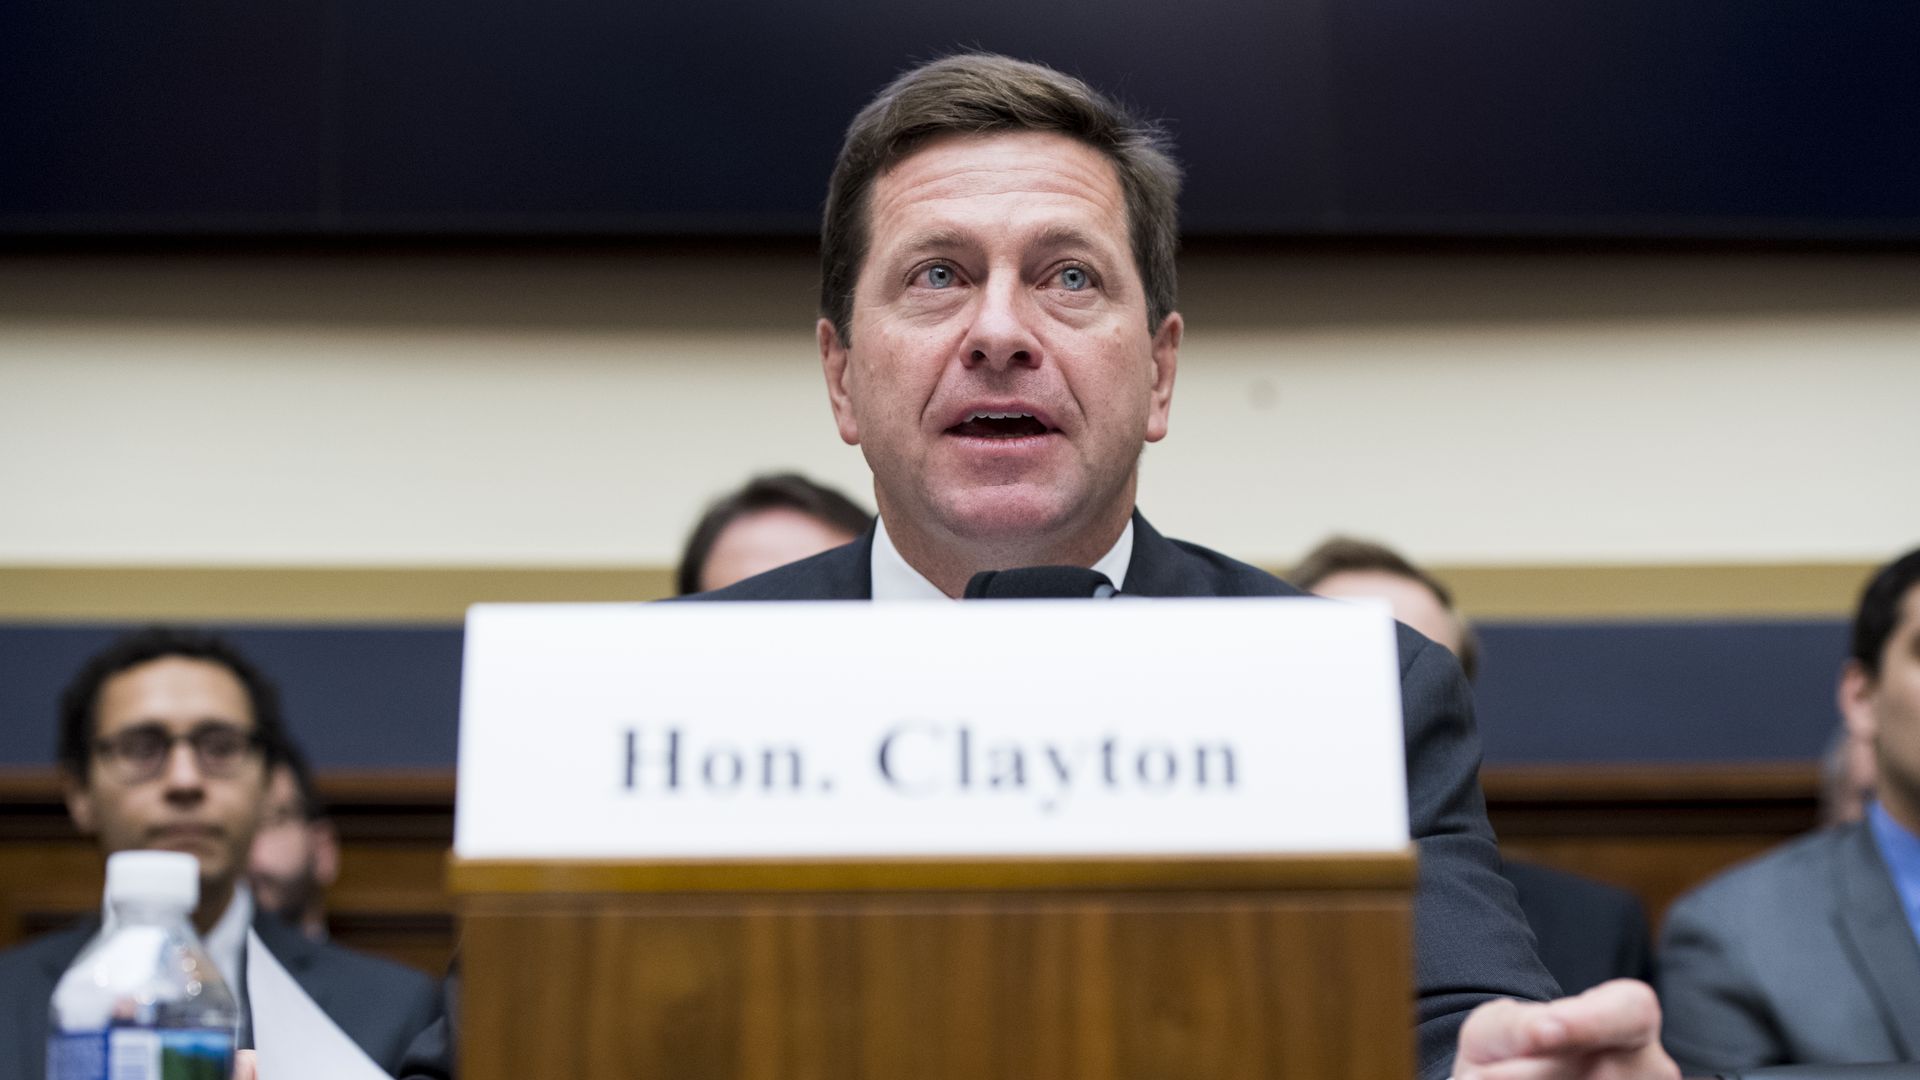 SEC chairman Jay Clayton testifying in front of Congress.